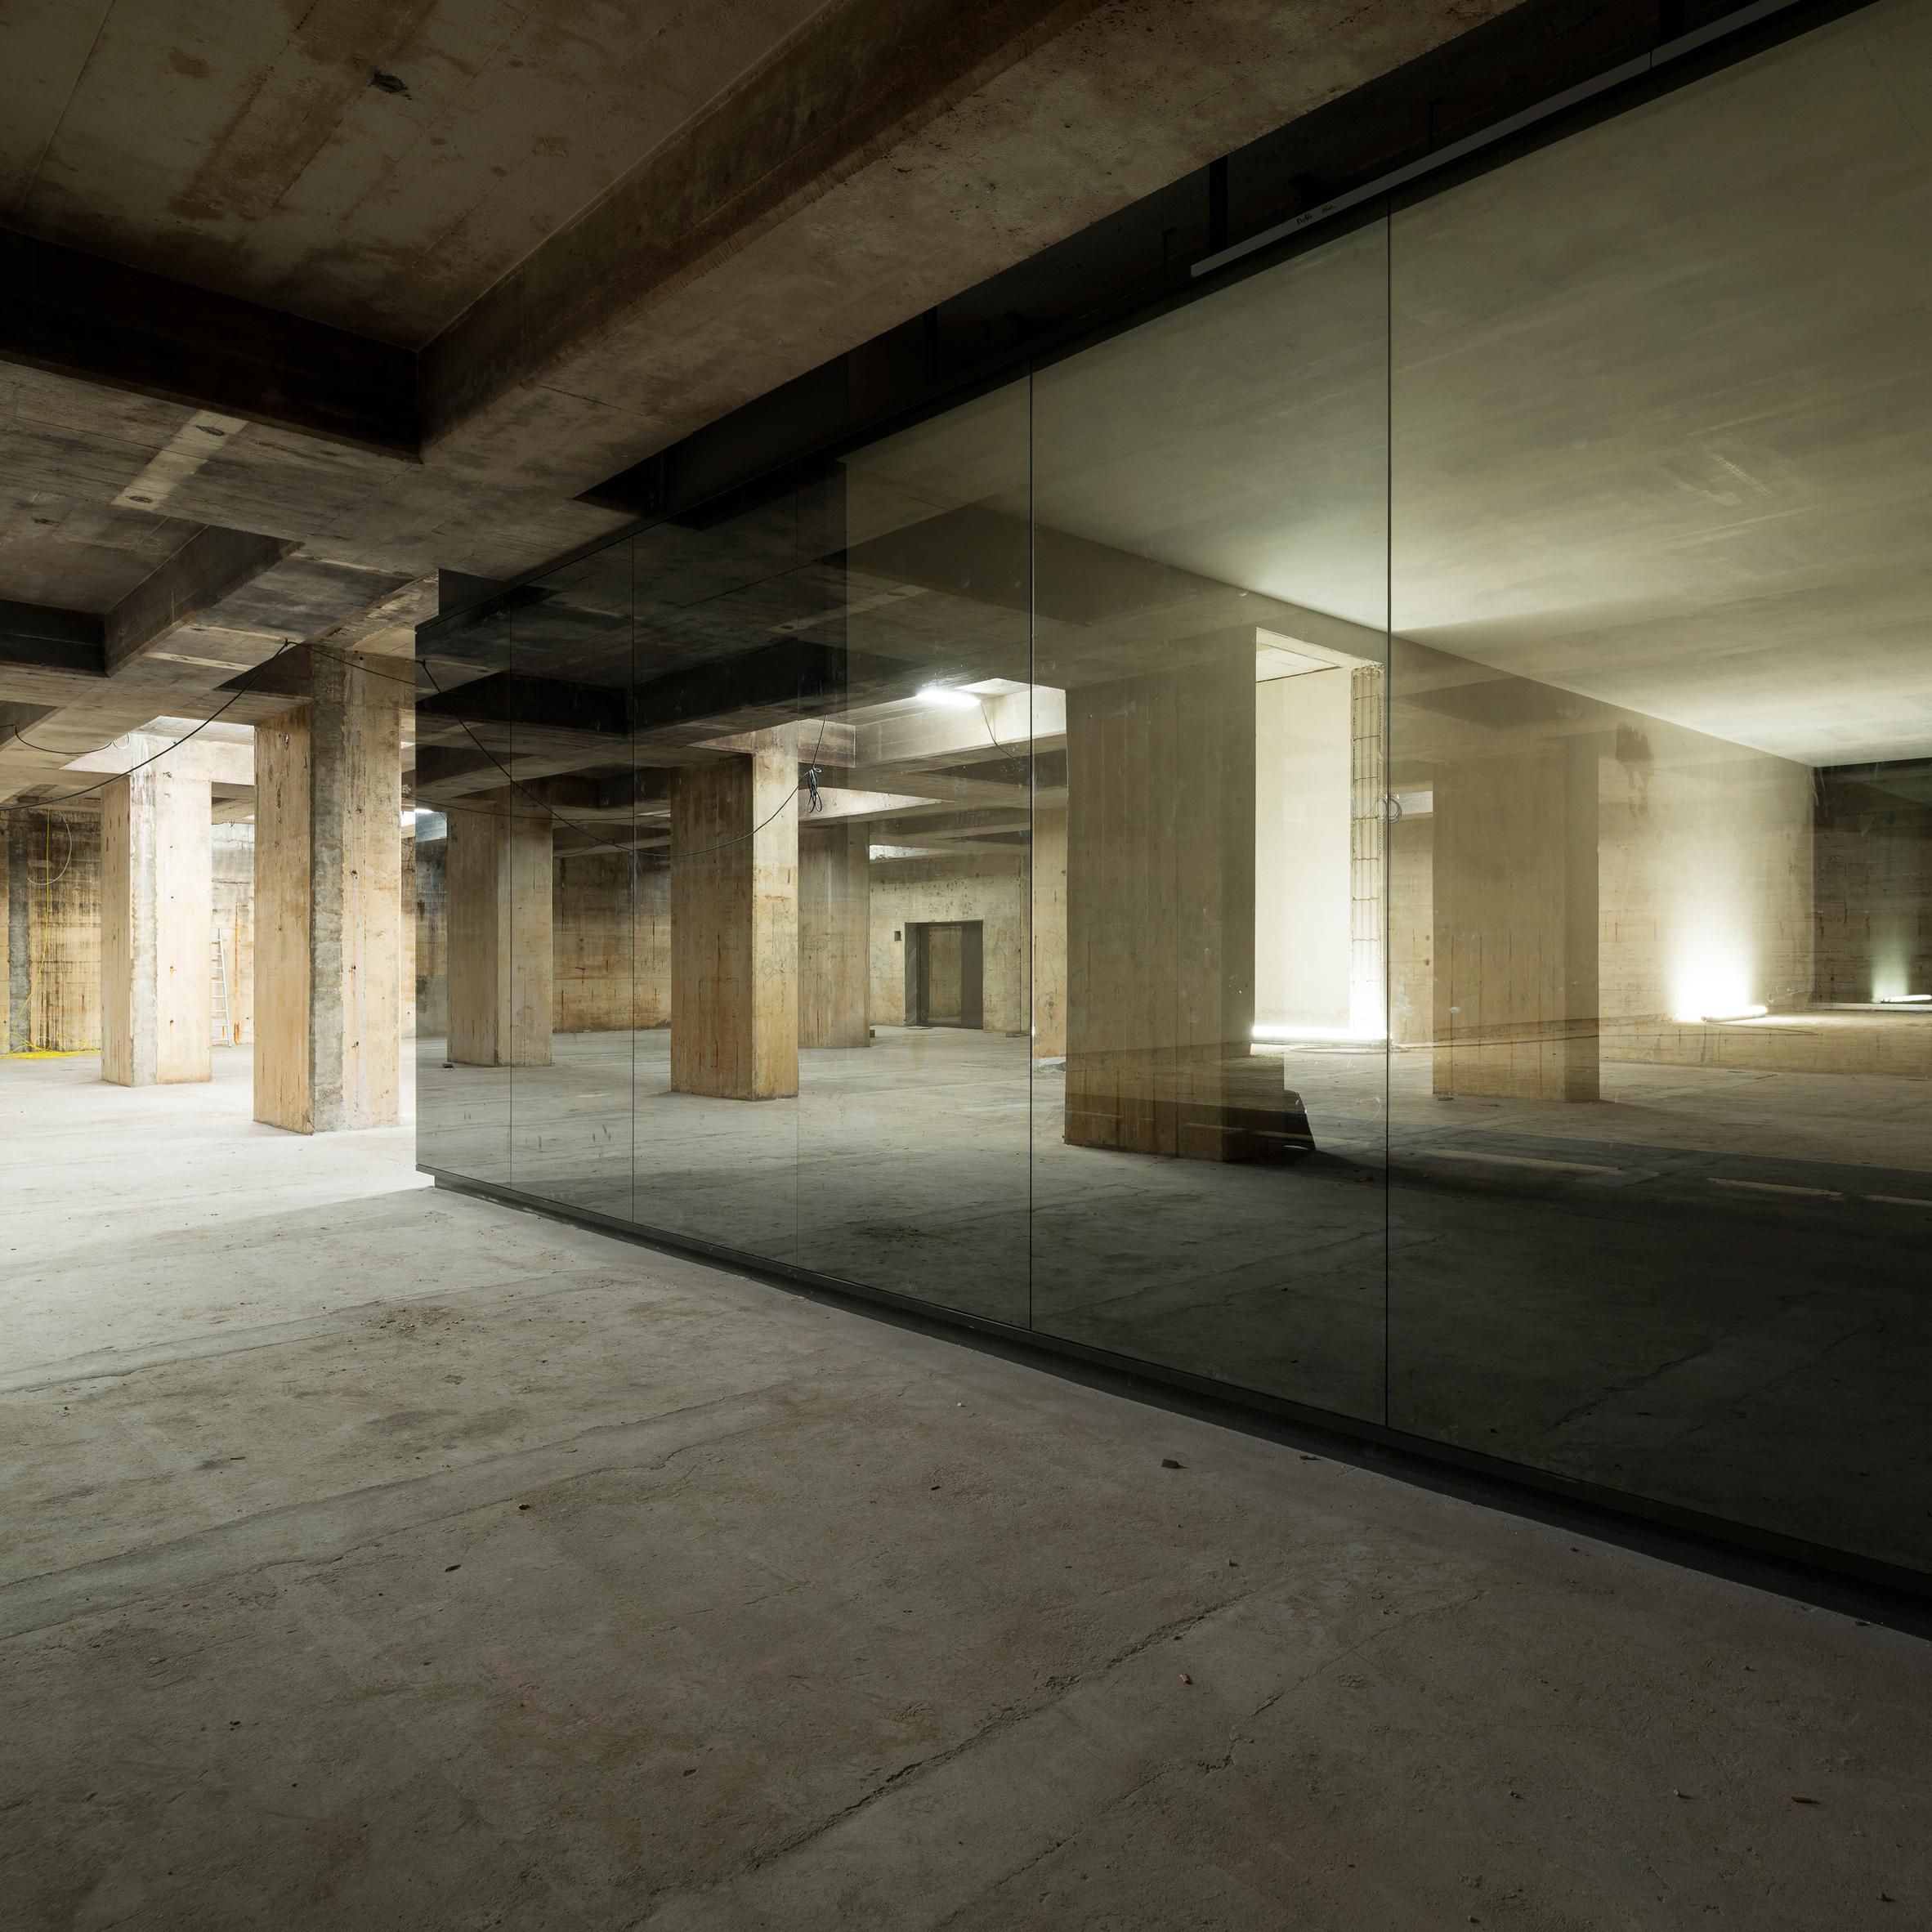 the-feuerle-collection-john-pawson-berlin-architecture-museums_dezeen_sqb